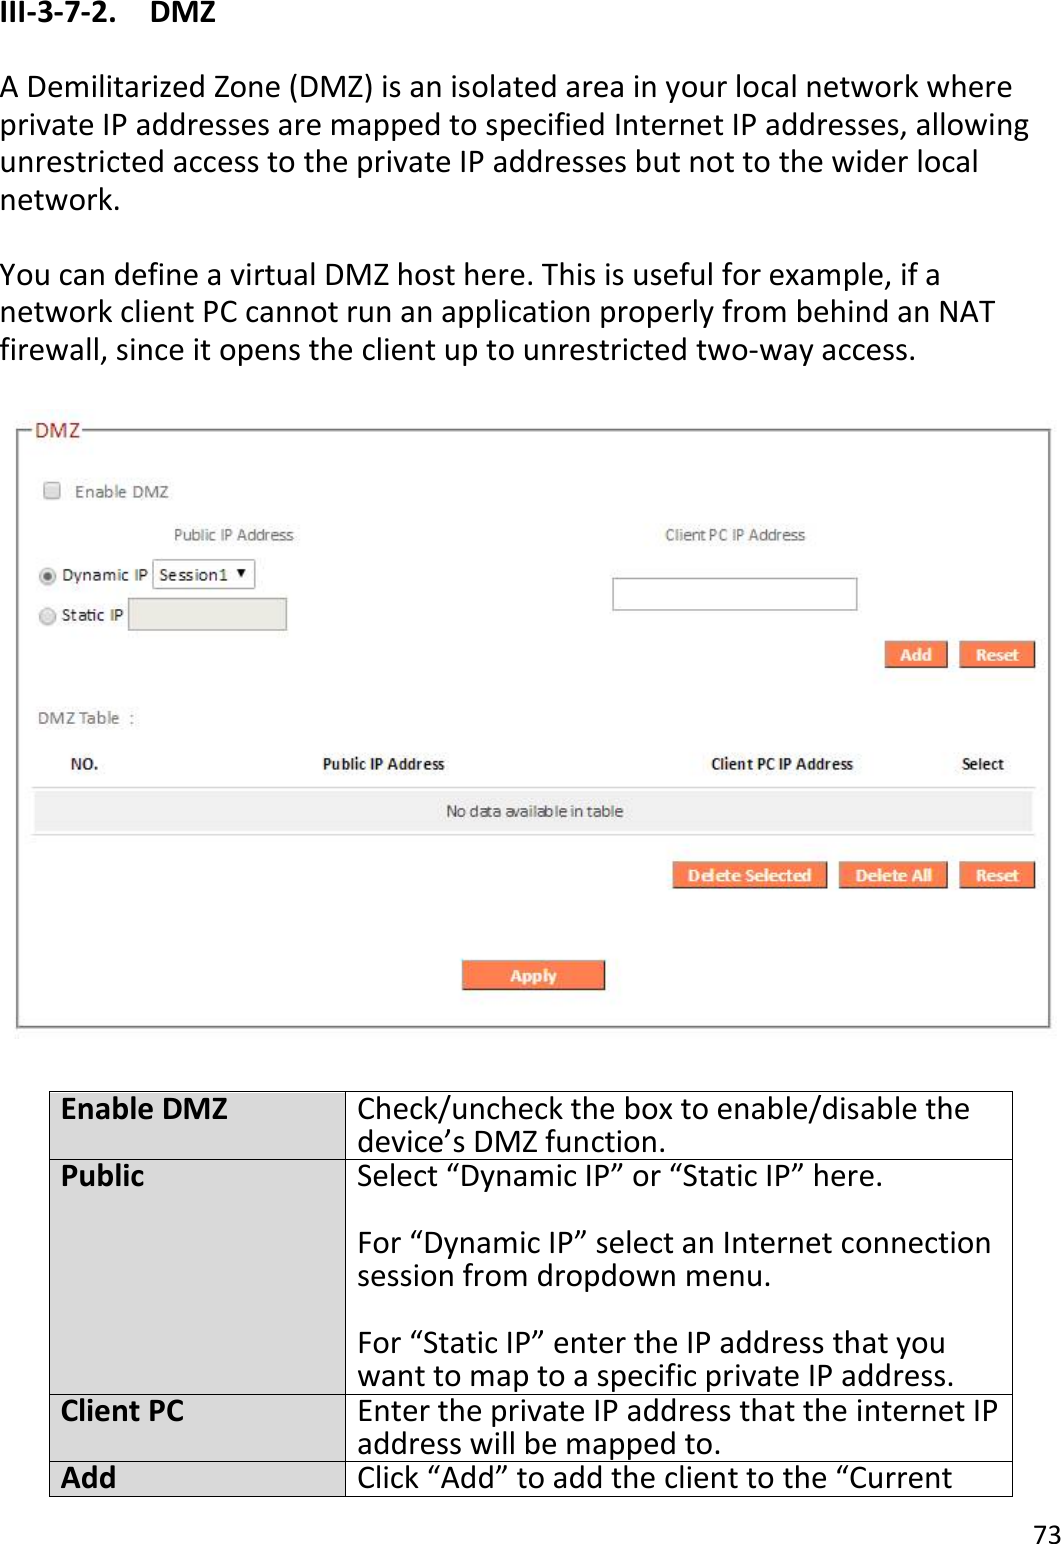 73  III-3-7-2.  DMZ  A Demilitarized Zone (DMZ) is an isolated area in your local network where private IP addresses are mapped to specified Internet IP addresses, allowing unrestricted access to the private IP addresses but not to the wider local network.  You can define a virtual DMZ host here. This is useful for example, if a network client PC cannot run an application properly from behind an NAT firewall, since it opens the client up to unrestricted two-way access.    Enable DMZ Check/uncheck the box to enable/disable the device’s DMZ function. Public Select “Dynamic IP” or “Static IP” here.  For “Dynamic IP” select an Internet connection session from dropdown menu.  For “Static IP” enter the IP address that you want to map to a specific private IP address. Client PC Enter the private IP address that the internet IP address will be mapped to. Add Click “Add” to add the client to the “Current 